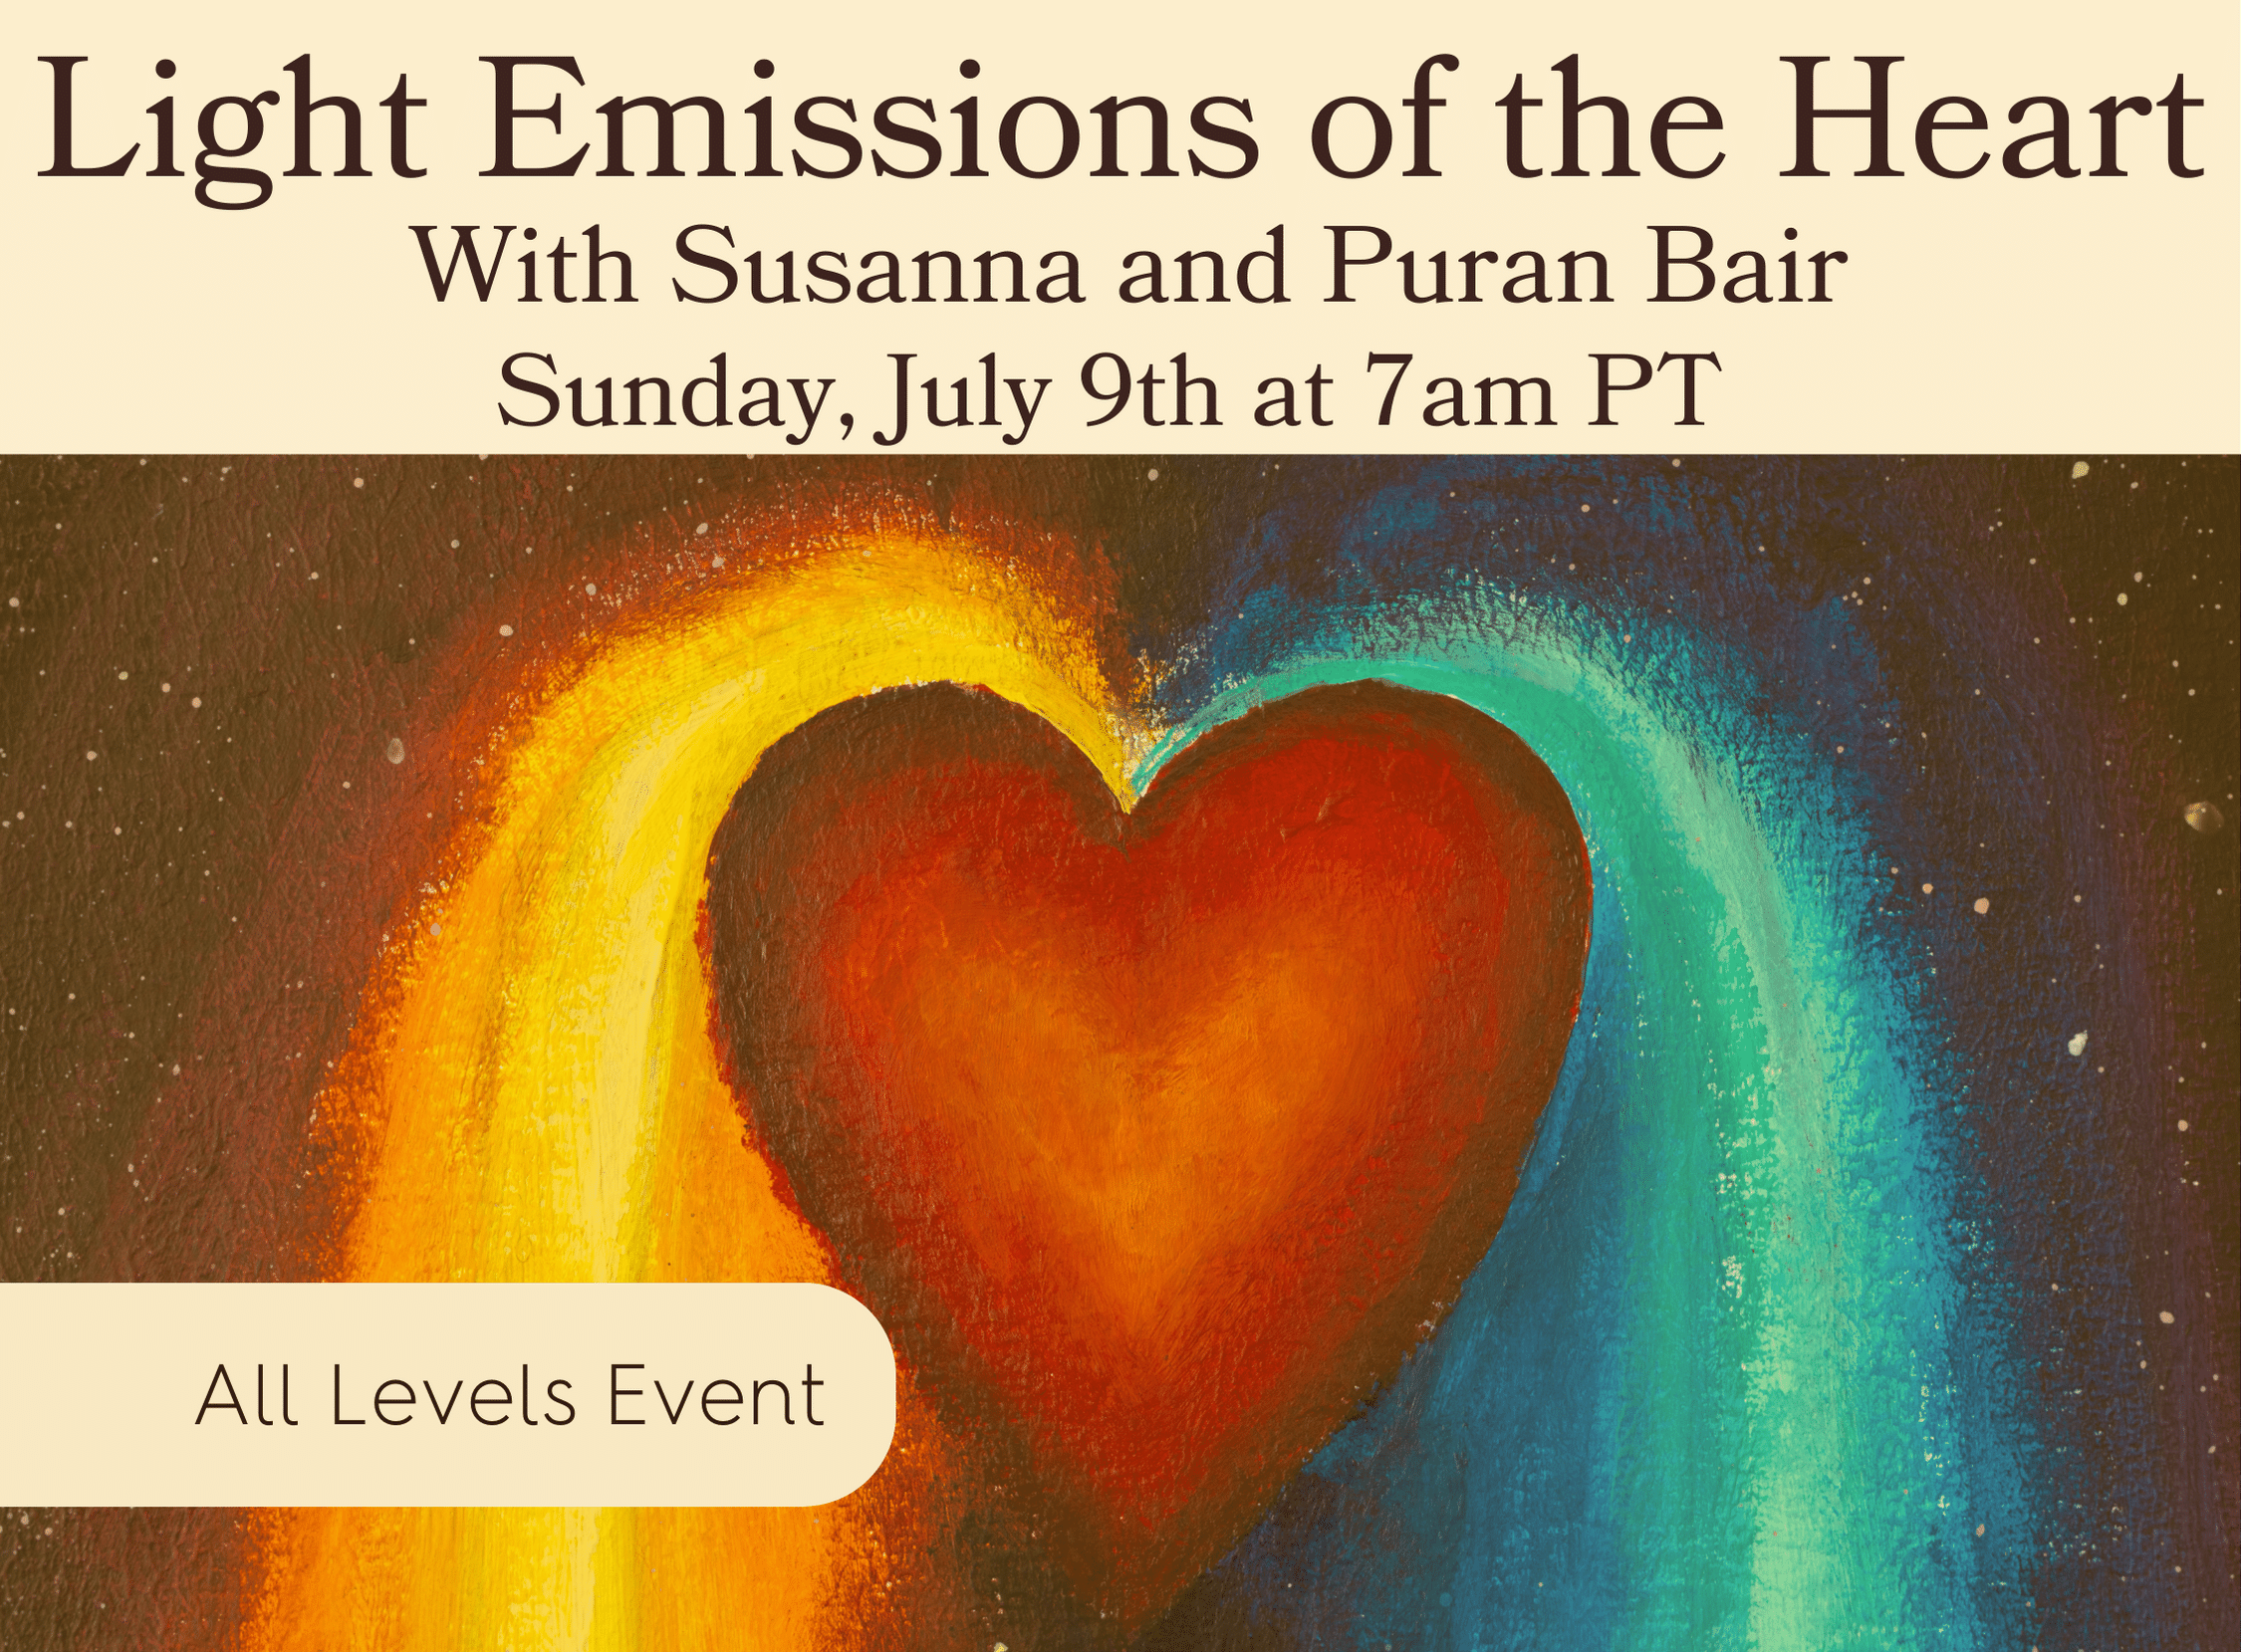 Light Emissions of the Heart